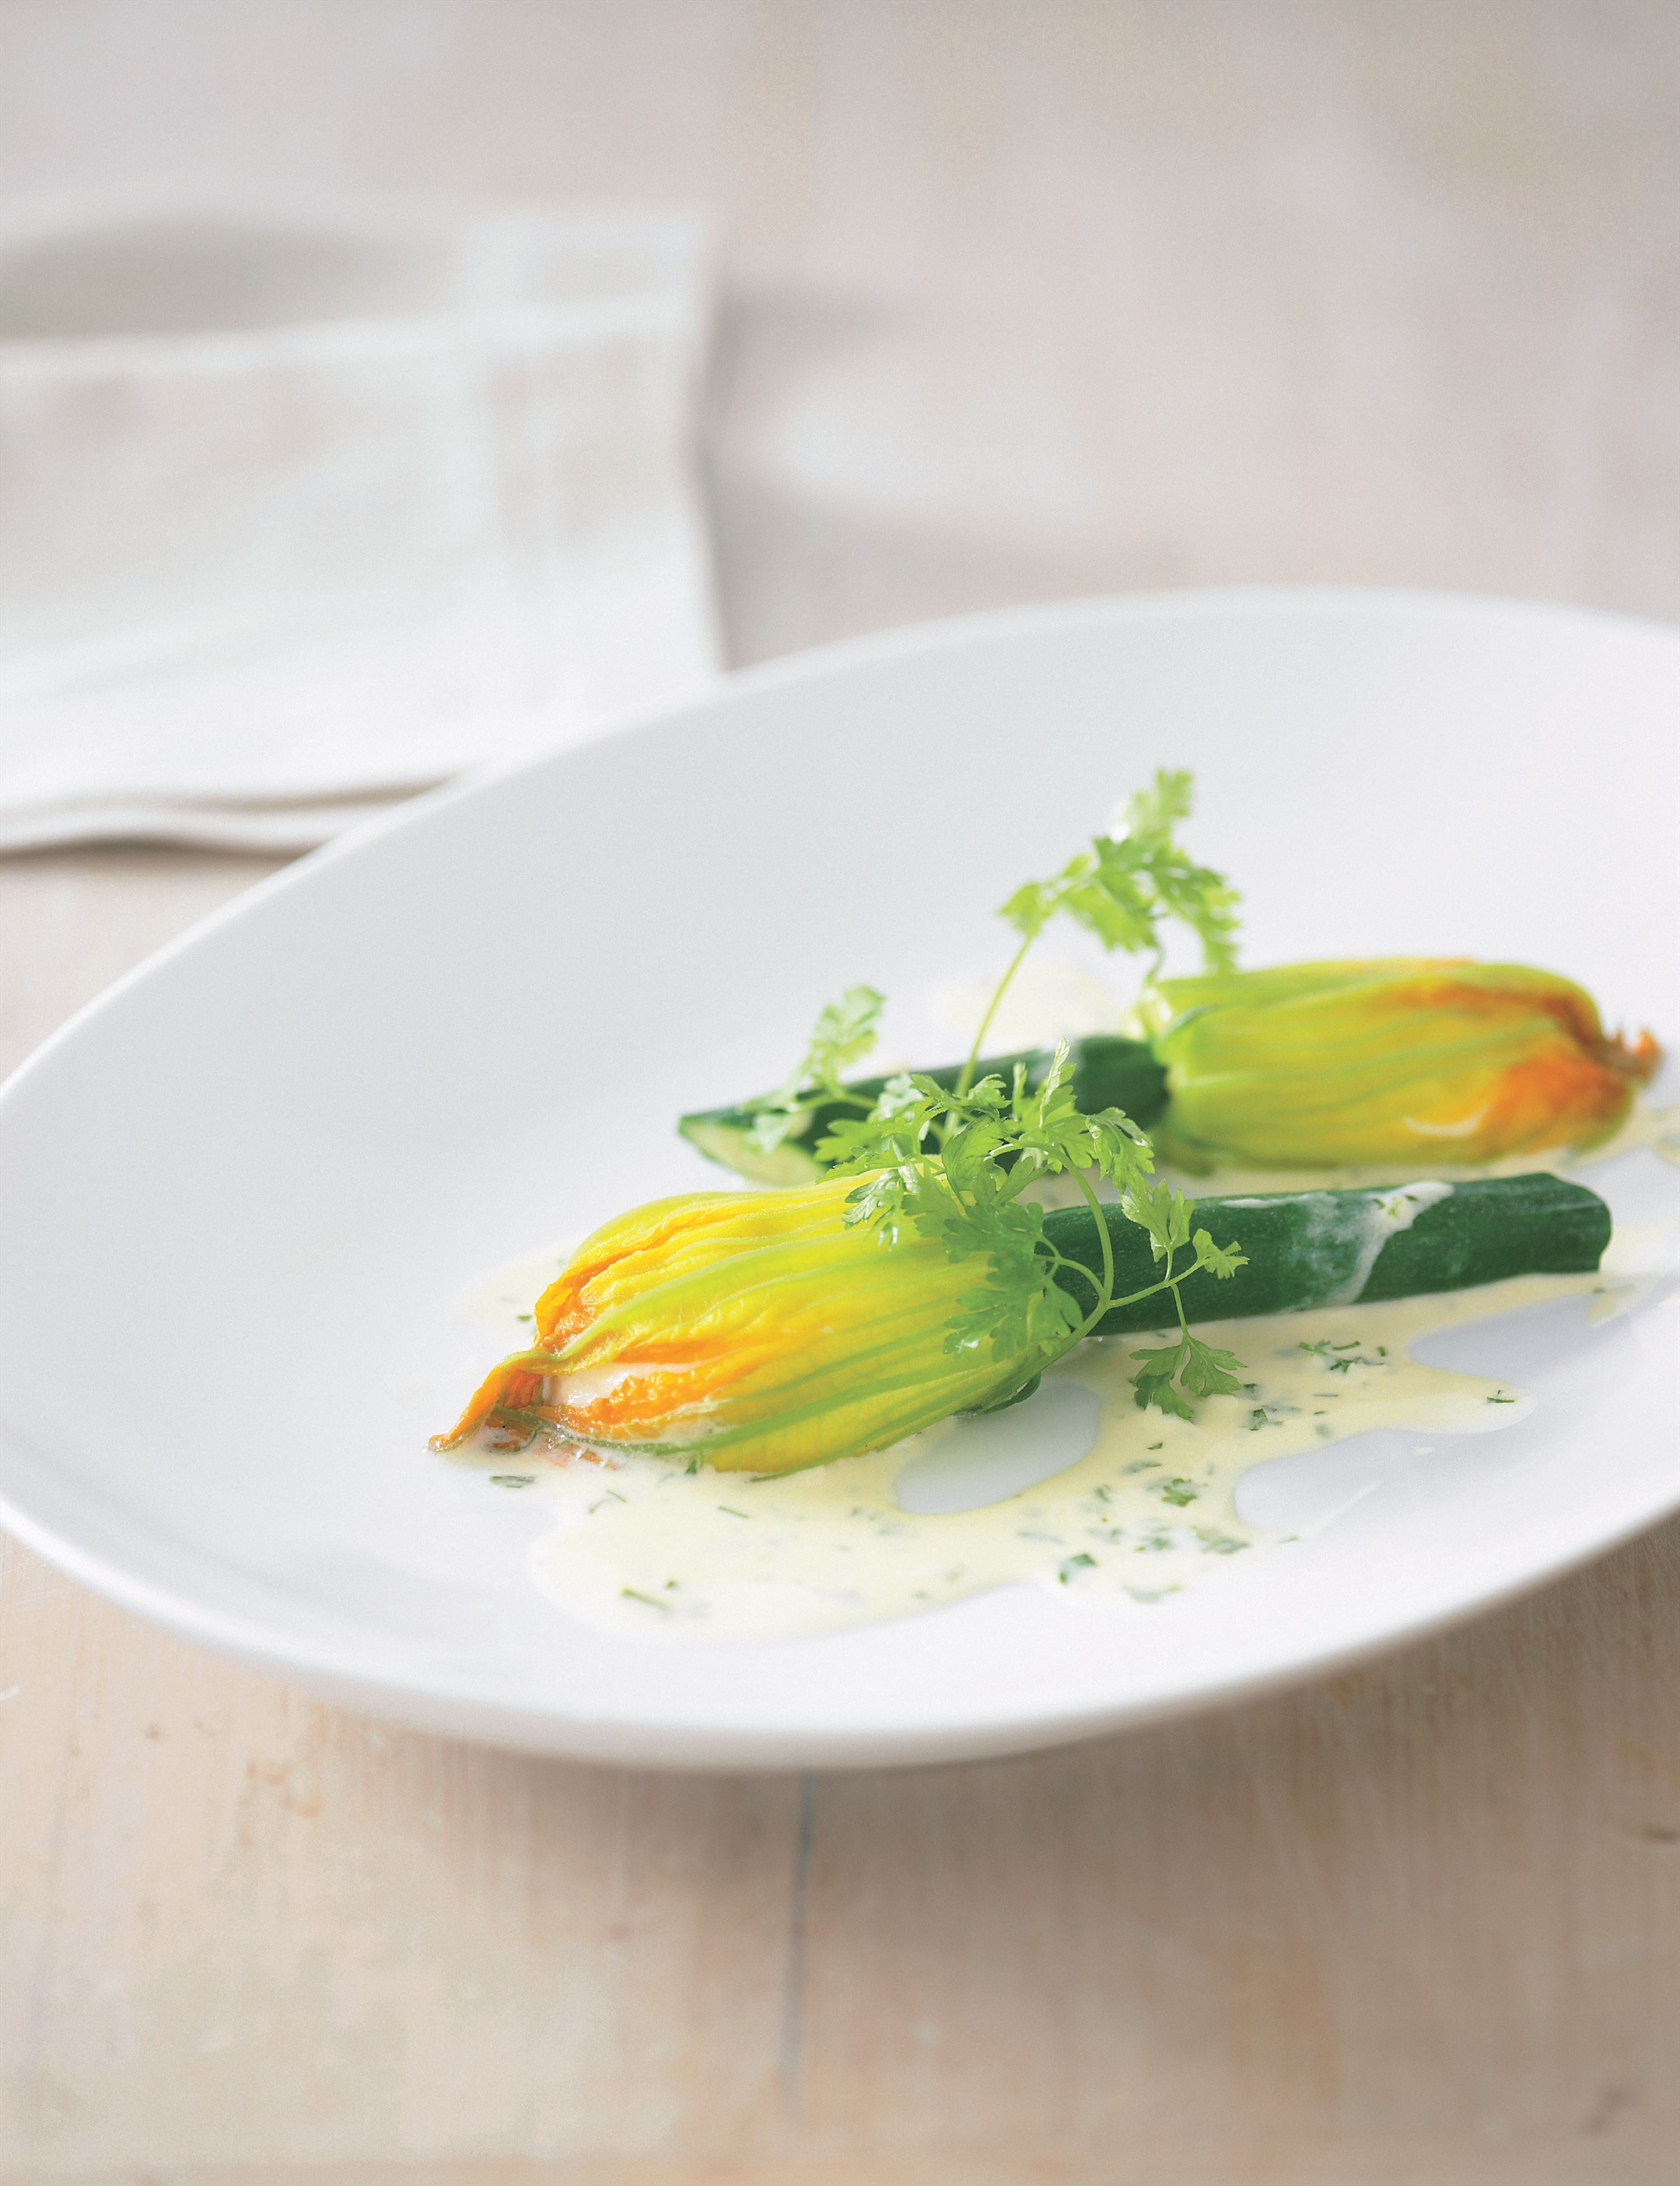 Steamed zucchini flowers and scallop mousse with Noilly Prat and chervil velouté